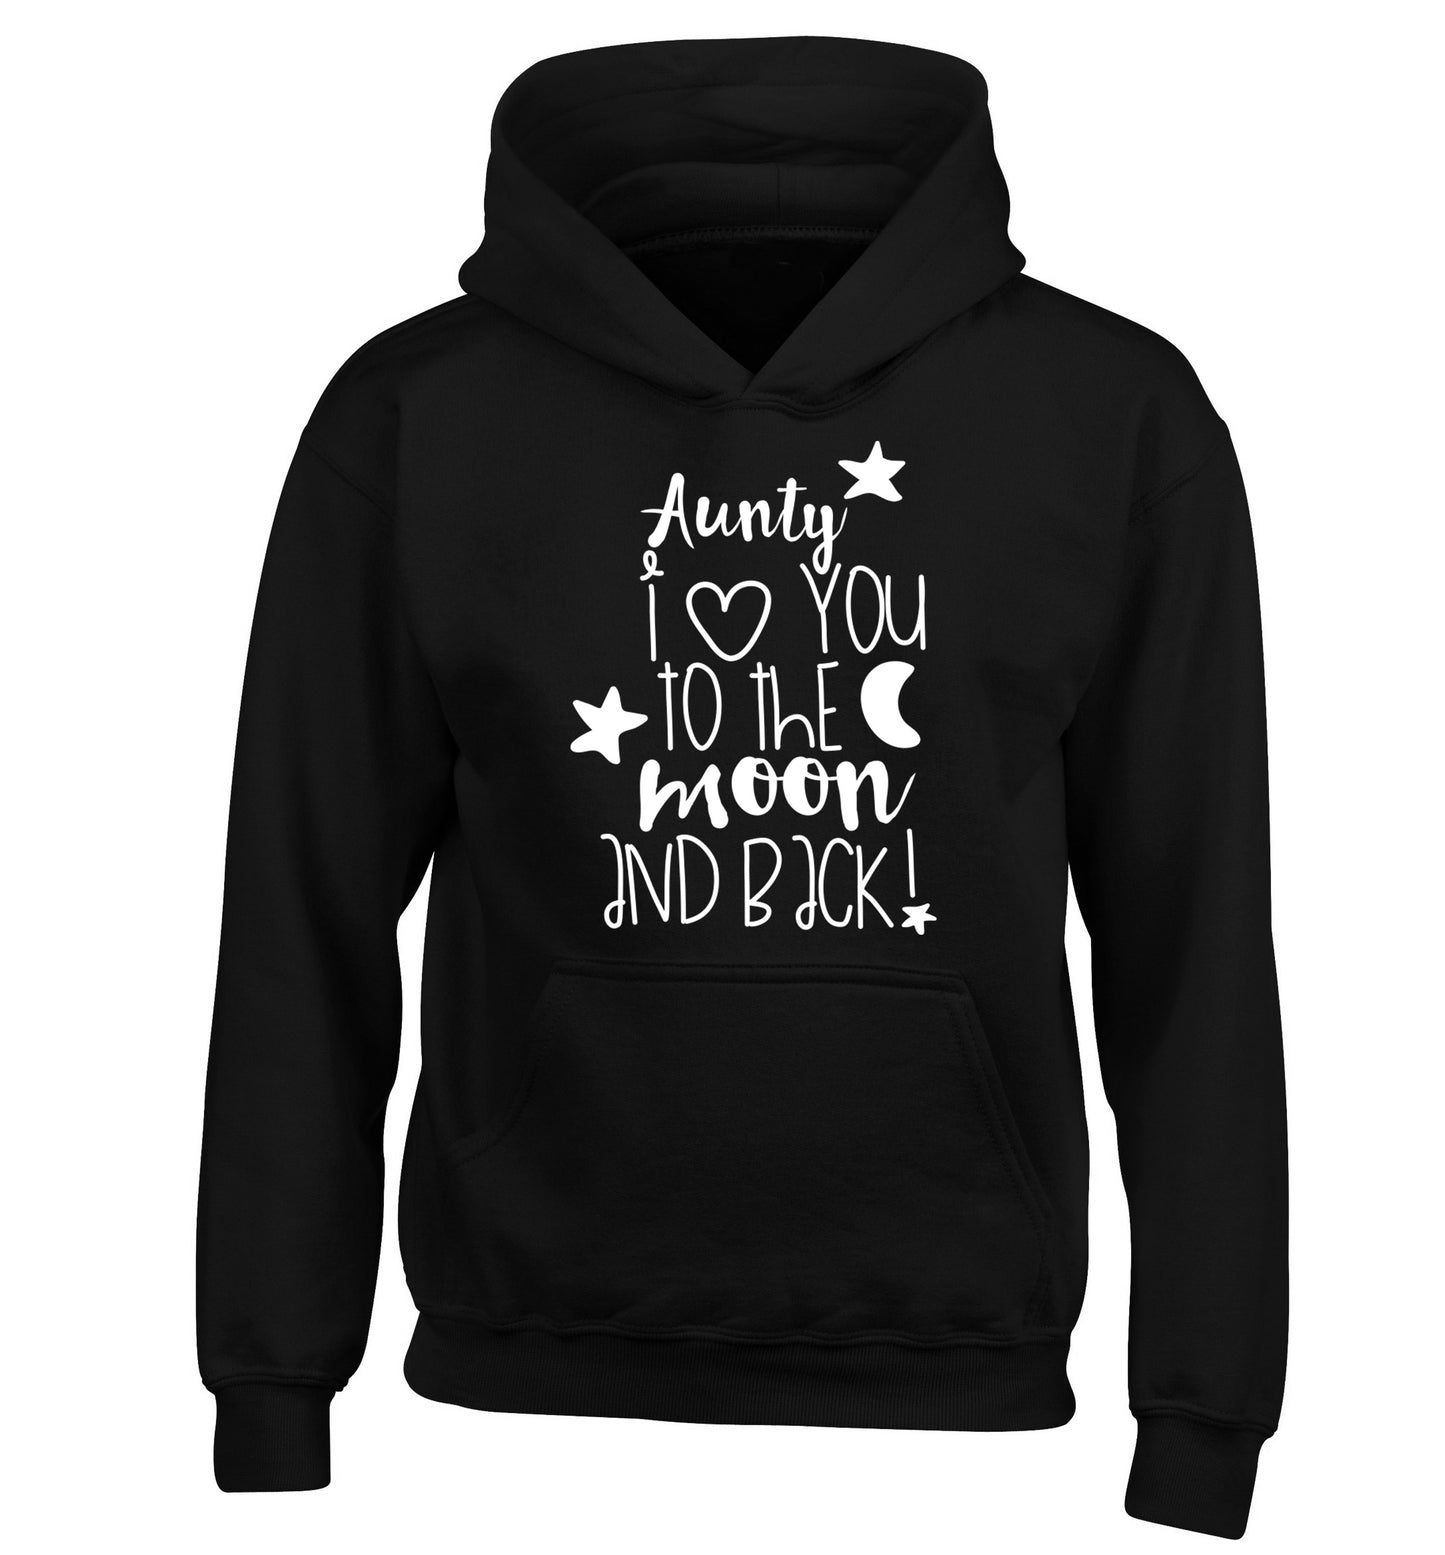 Aunty I love you to the moon and back children's black hoodie 12-14 Years